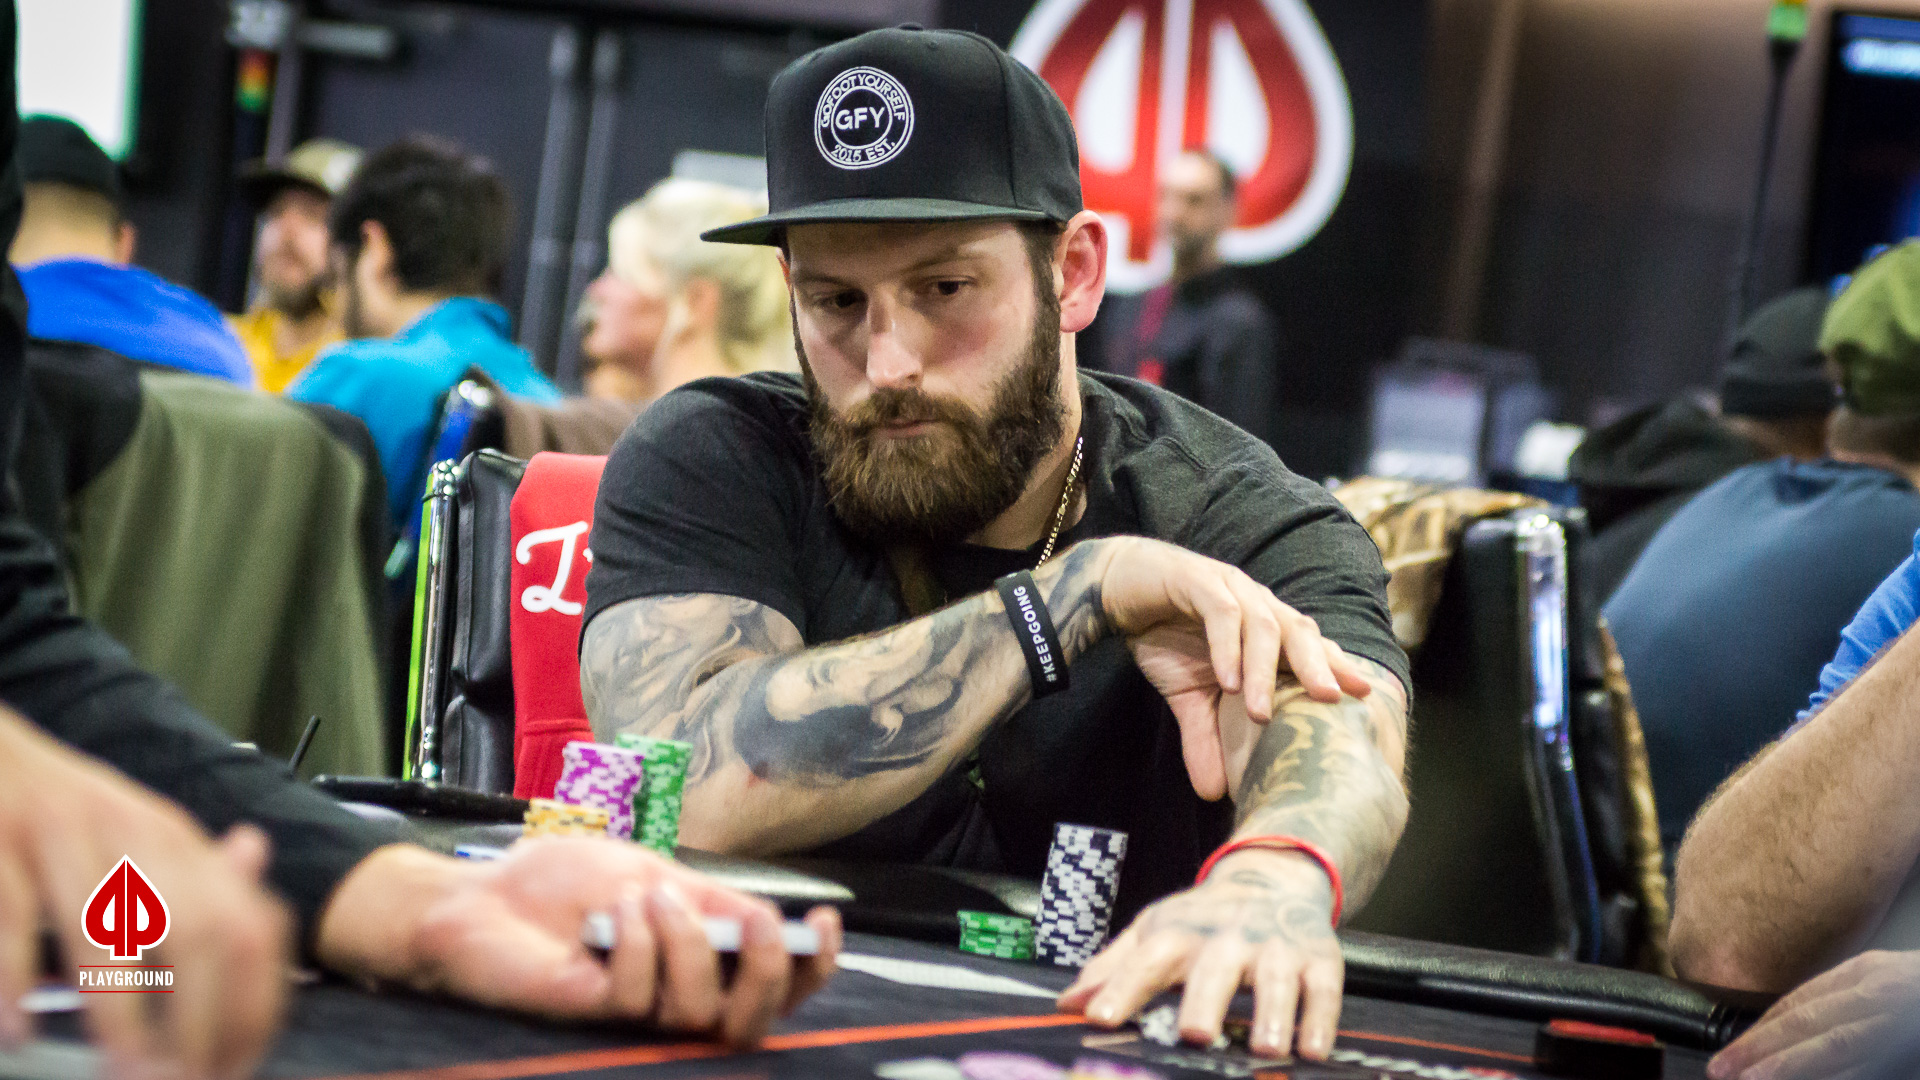 Fifteen local players make the money in the WSOP Main Event